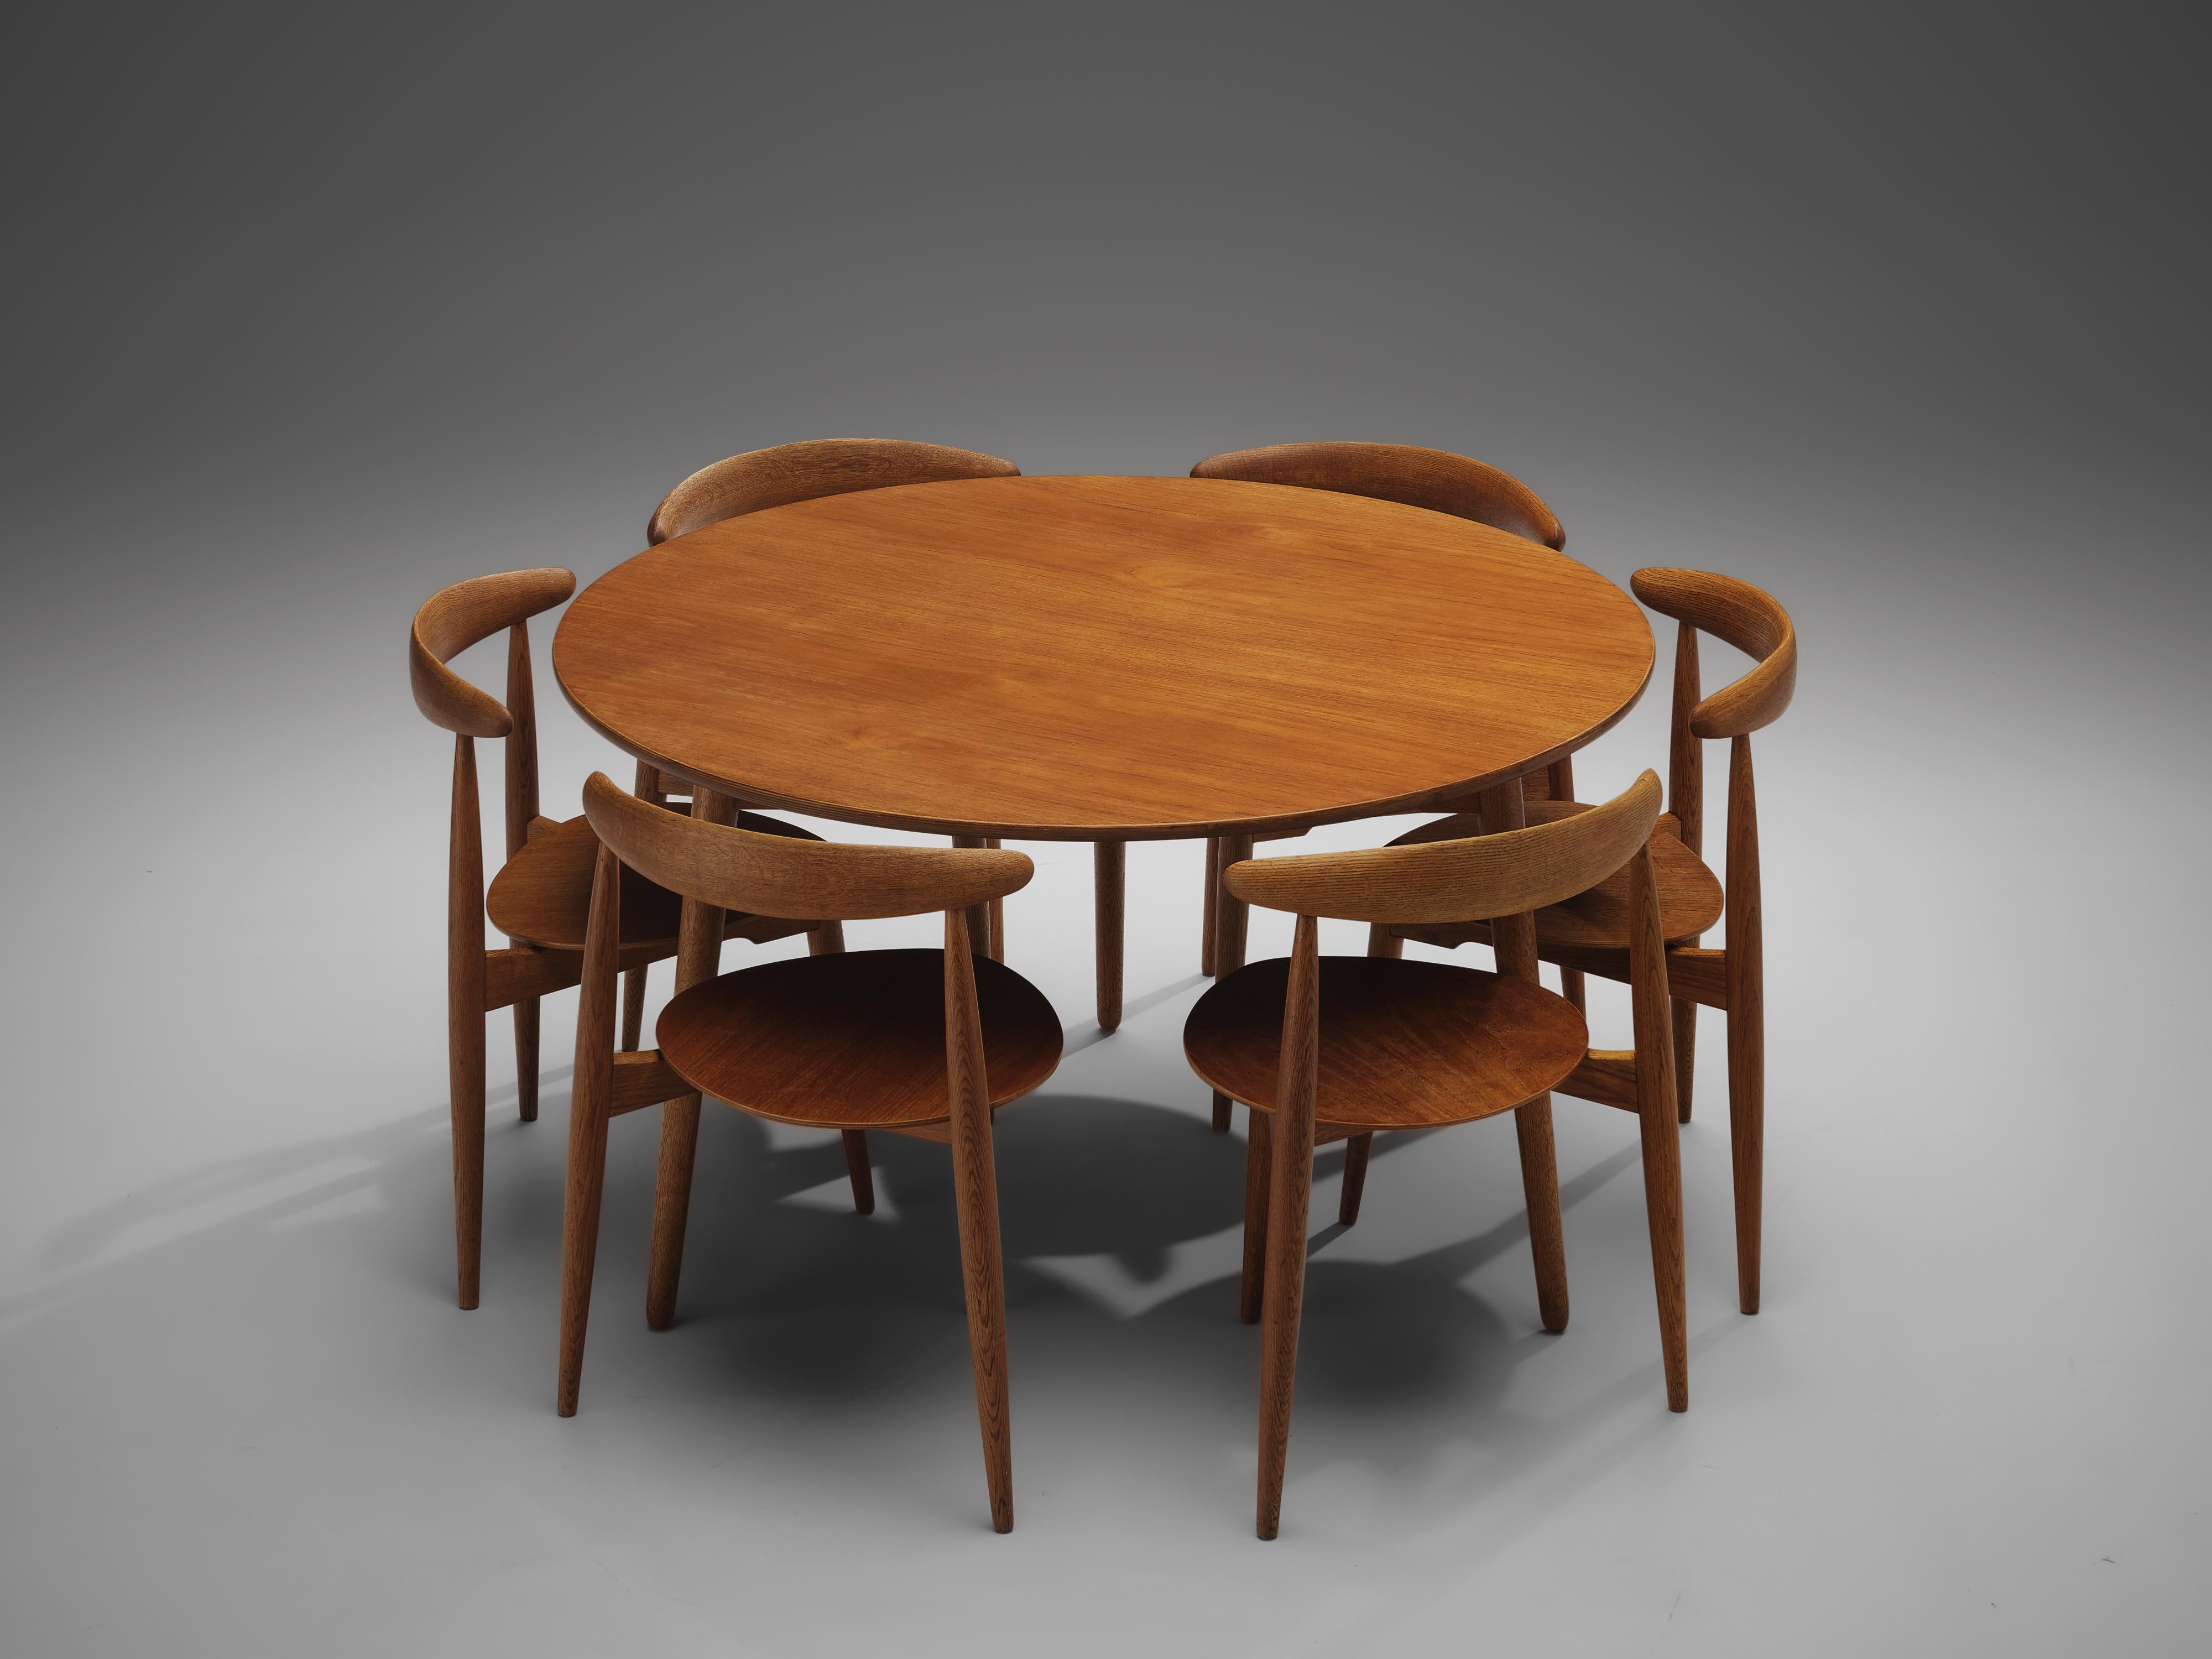 Hans J. Wegner for Fritz Hansen, set of 6 'Heart’ chairs FH4103 and dining table, teak, oak, Denmark, 1953

This dining set, consisting of a round dining table and six dining chairs model FH4103, is designed by Hans Wegner in 1953. The chairs are